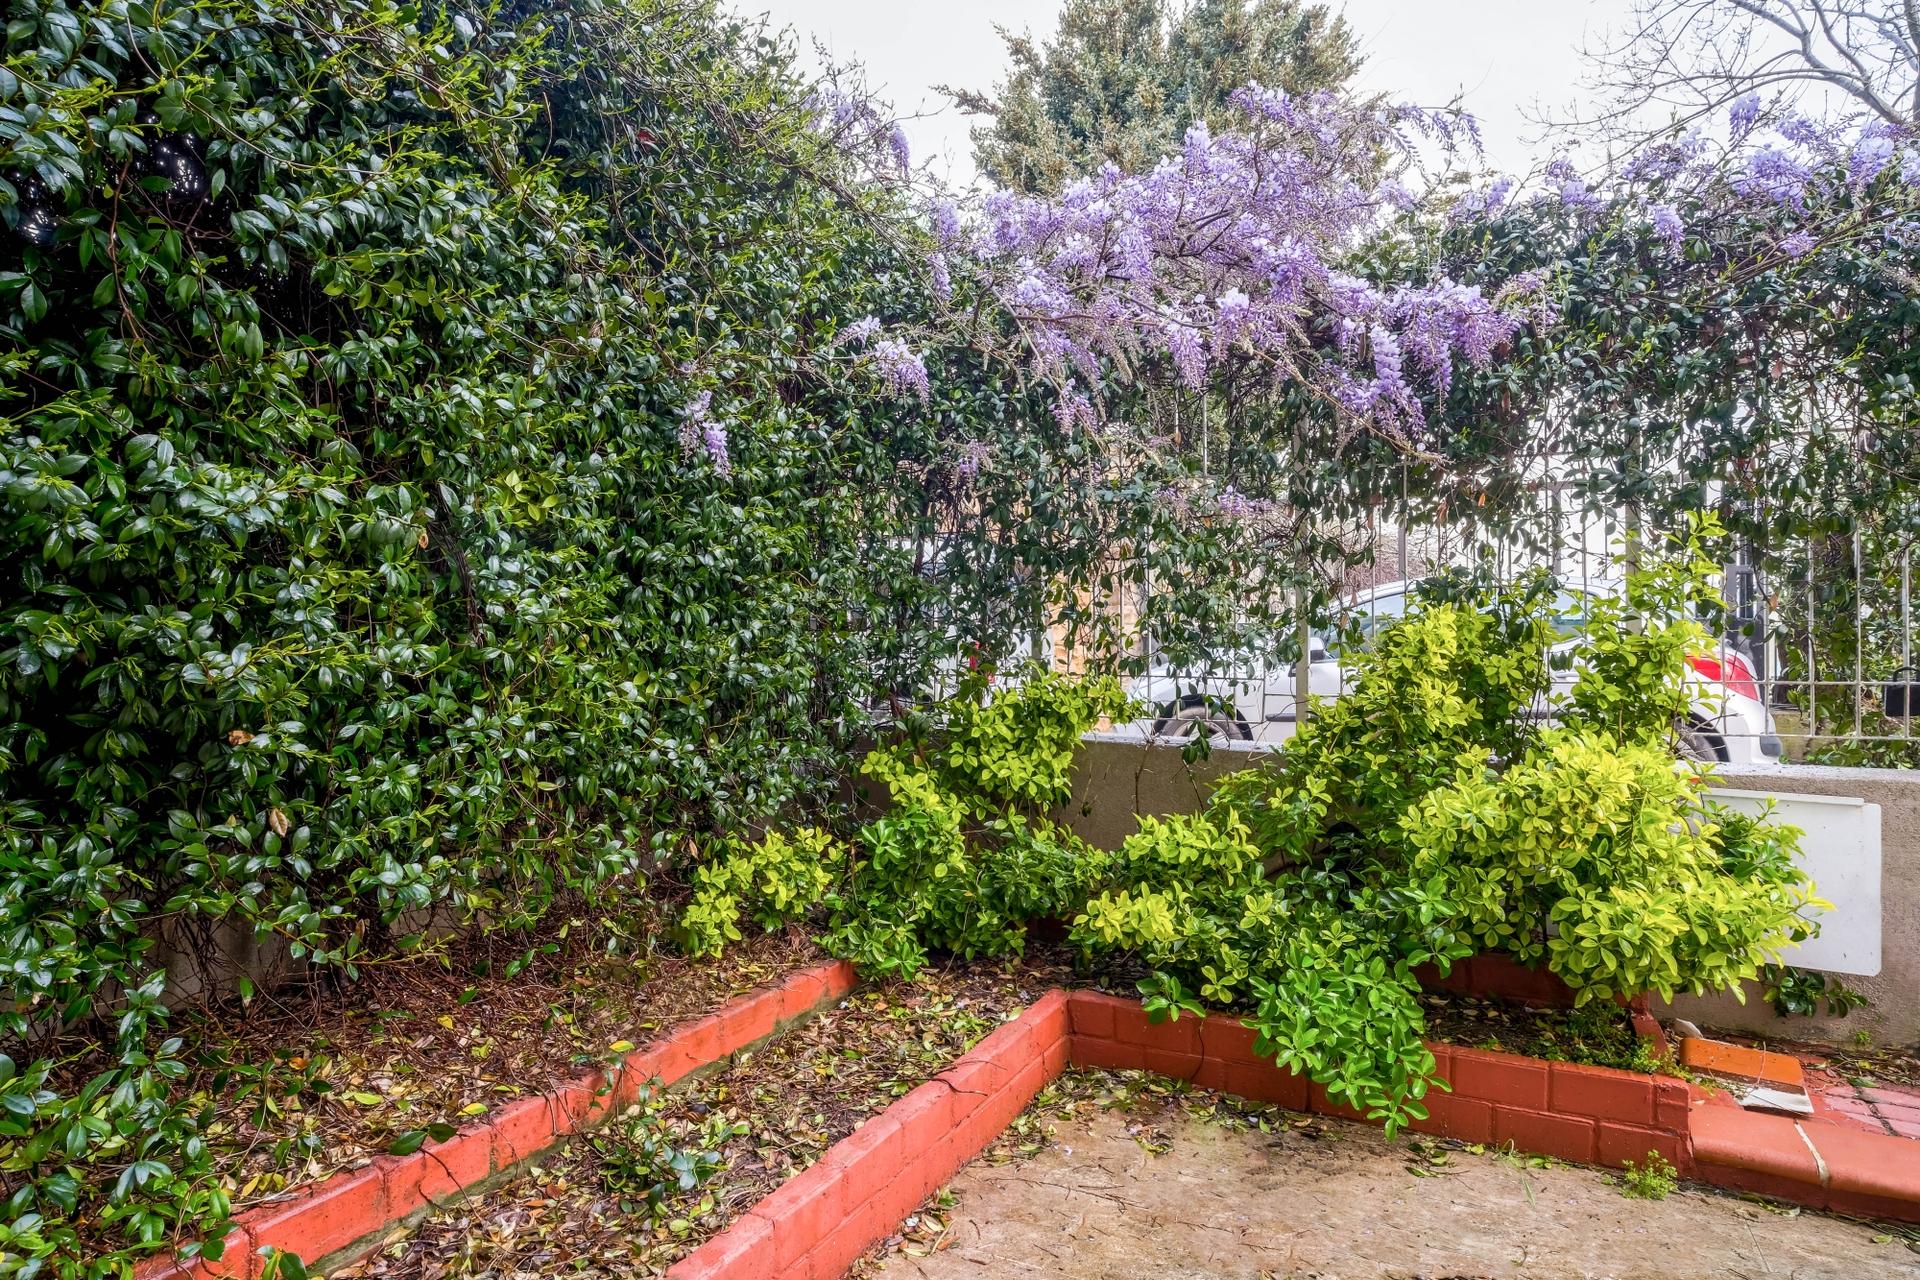 This garden adorned with fragrant flowers will be right at your doorstep!